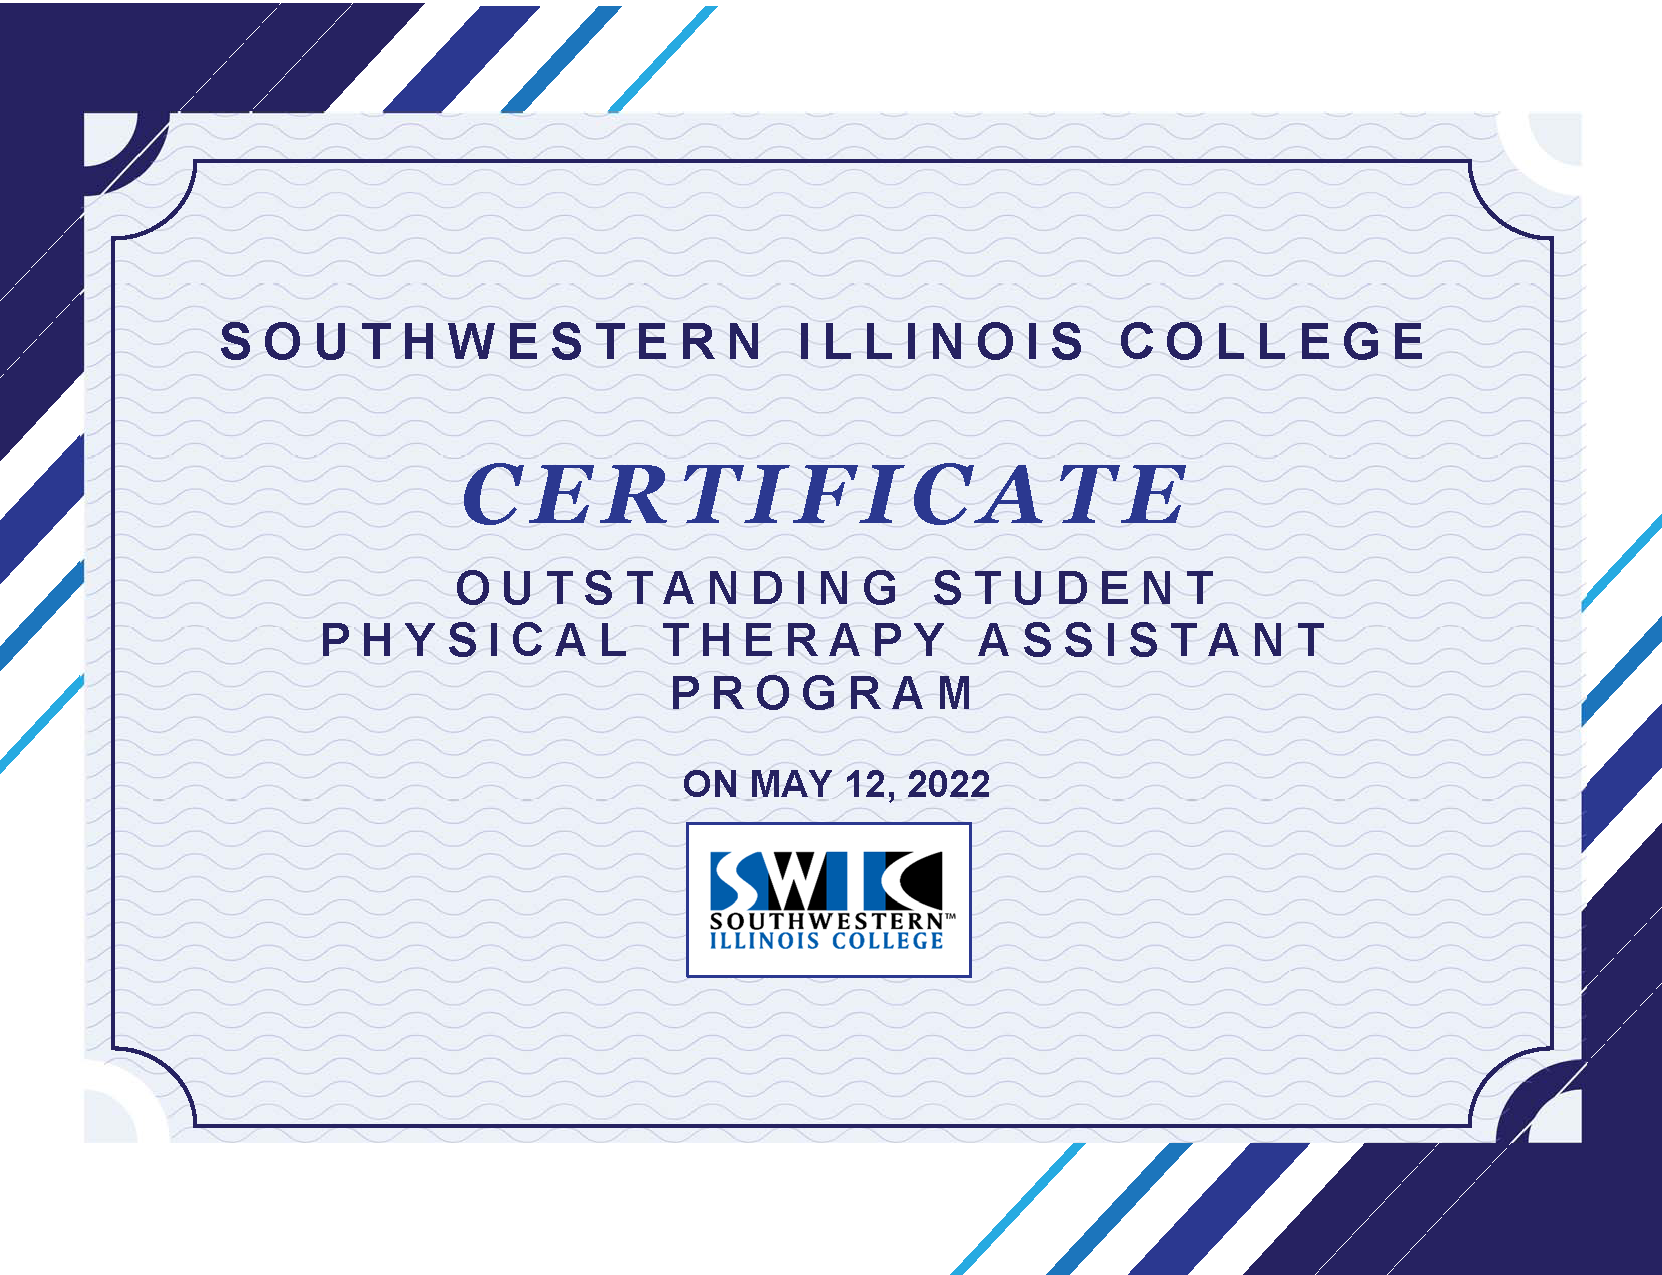 Southwestern Illinois College Certificate Outstanding Student Physical Therapy Assistant Program